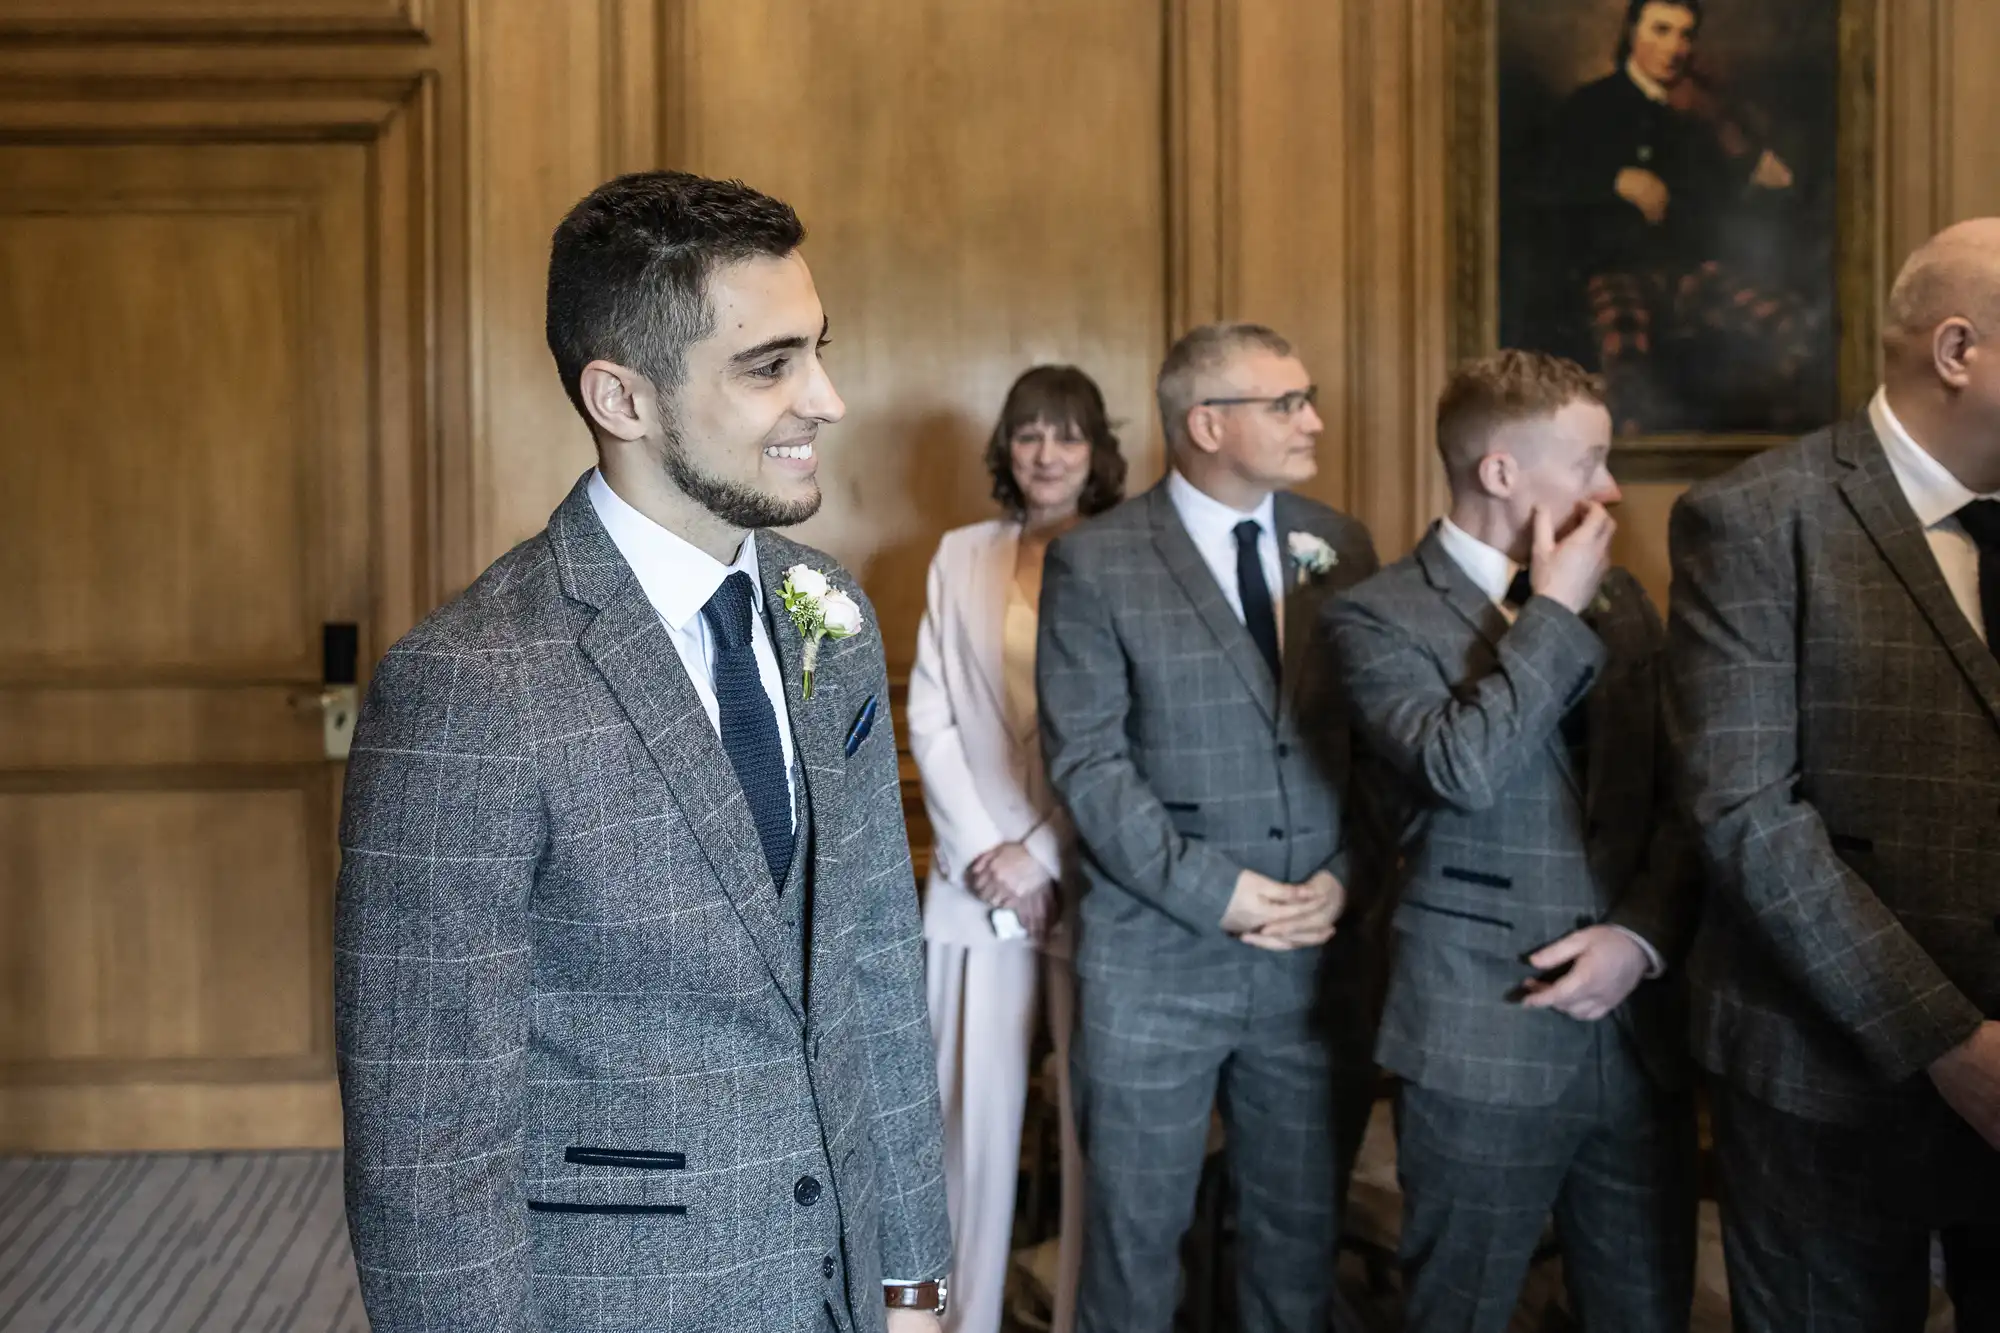 A groom in a gray plaid suit smiles during a wedding ceremony in an elegant room, with four guests in the background.